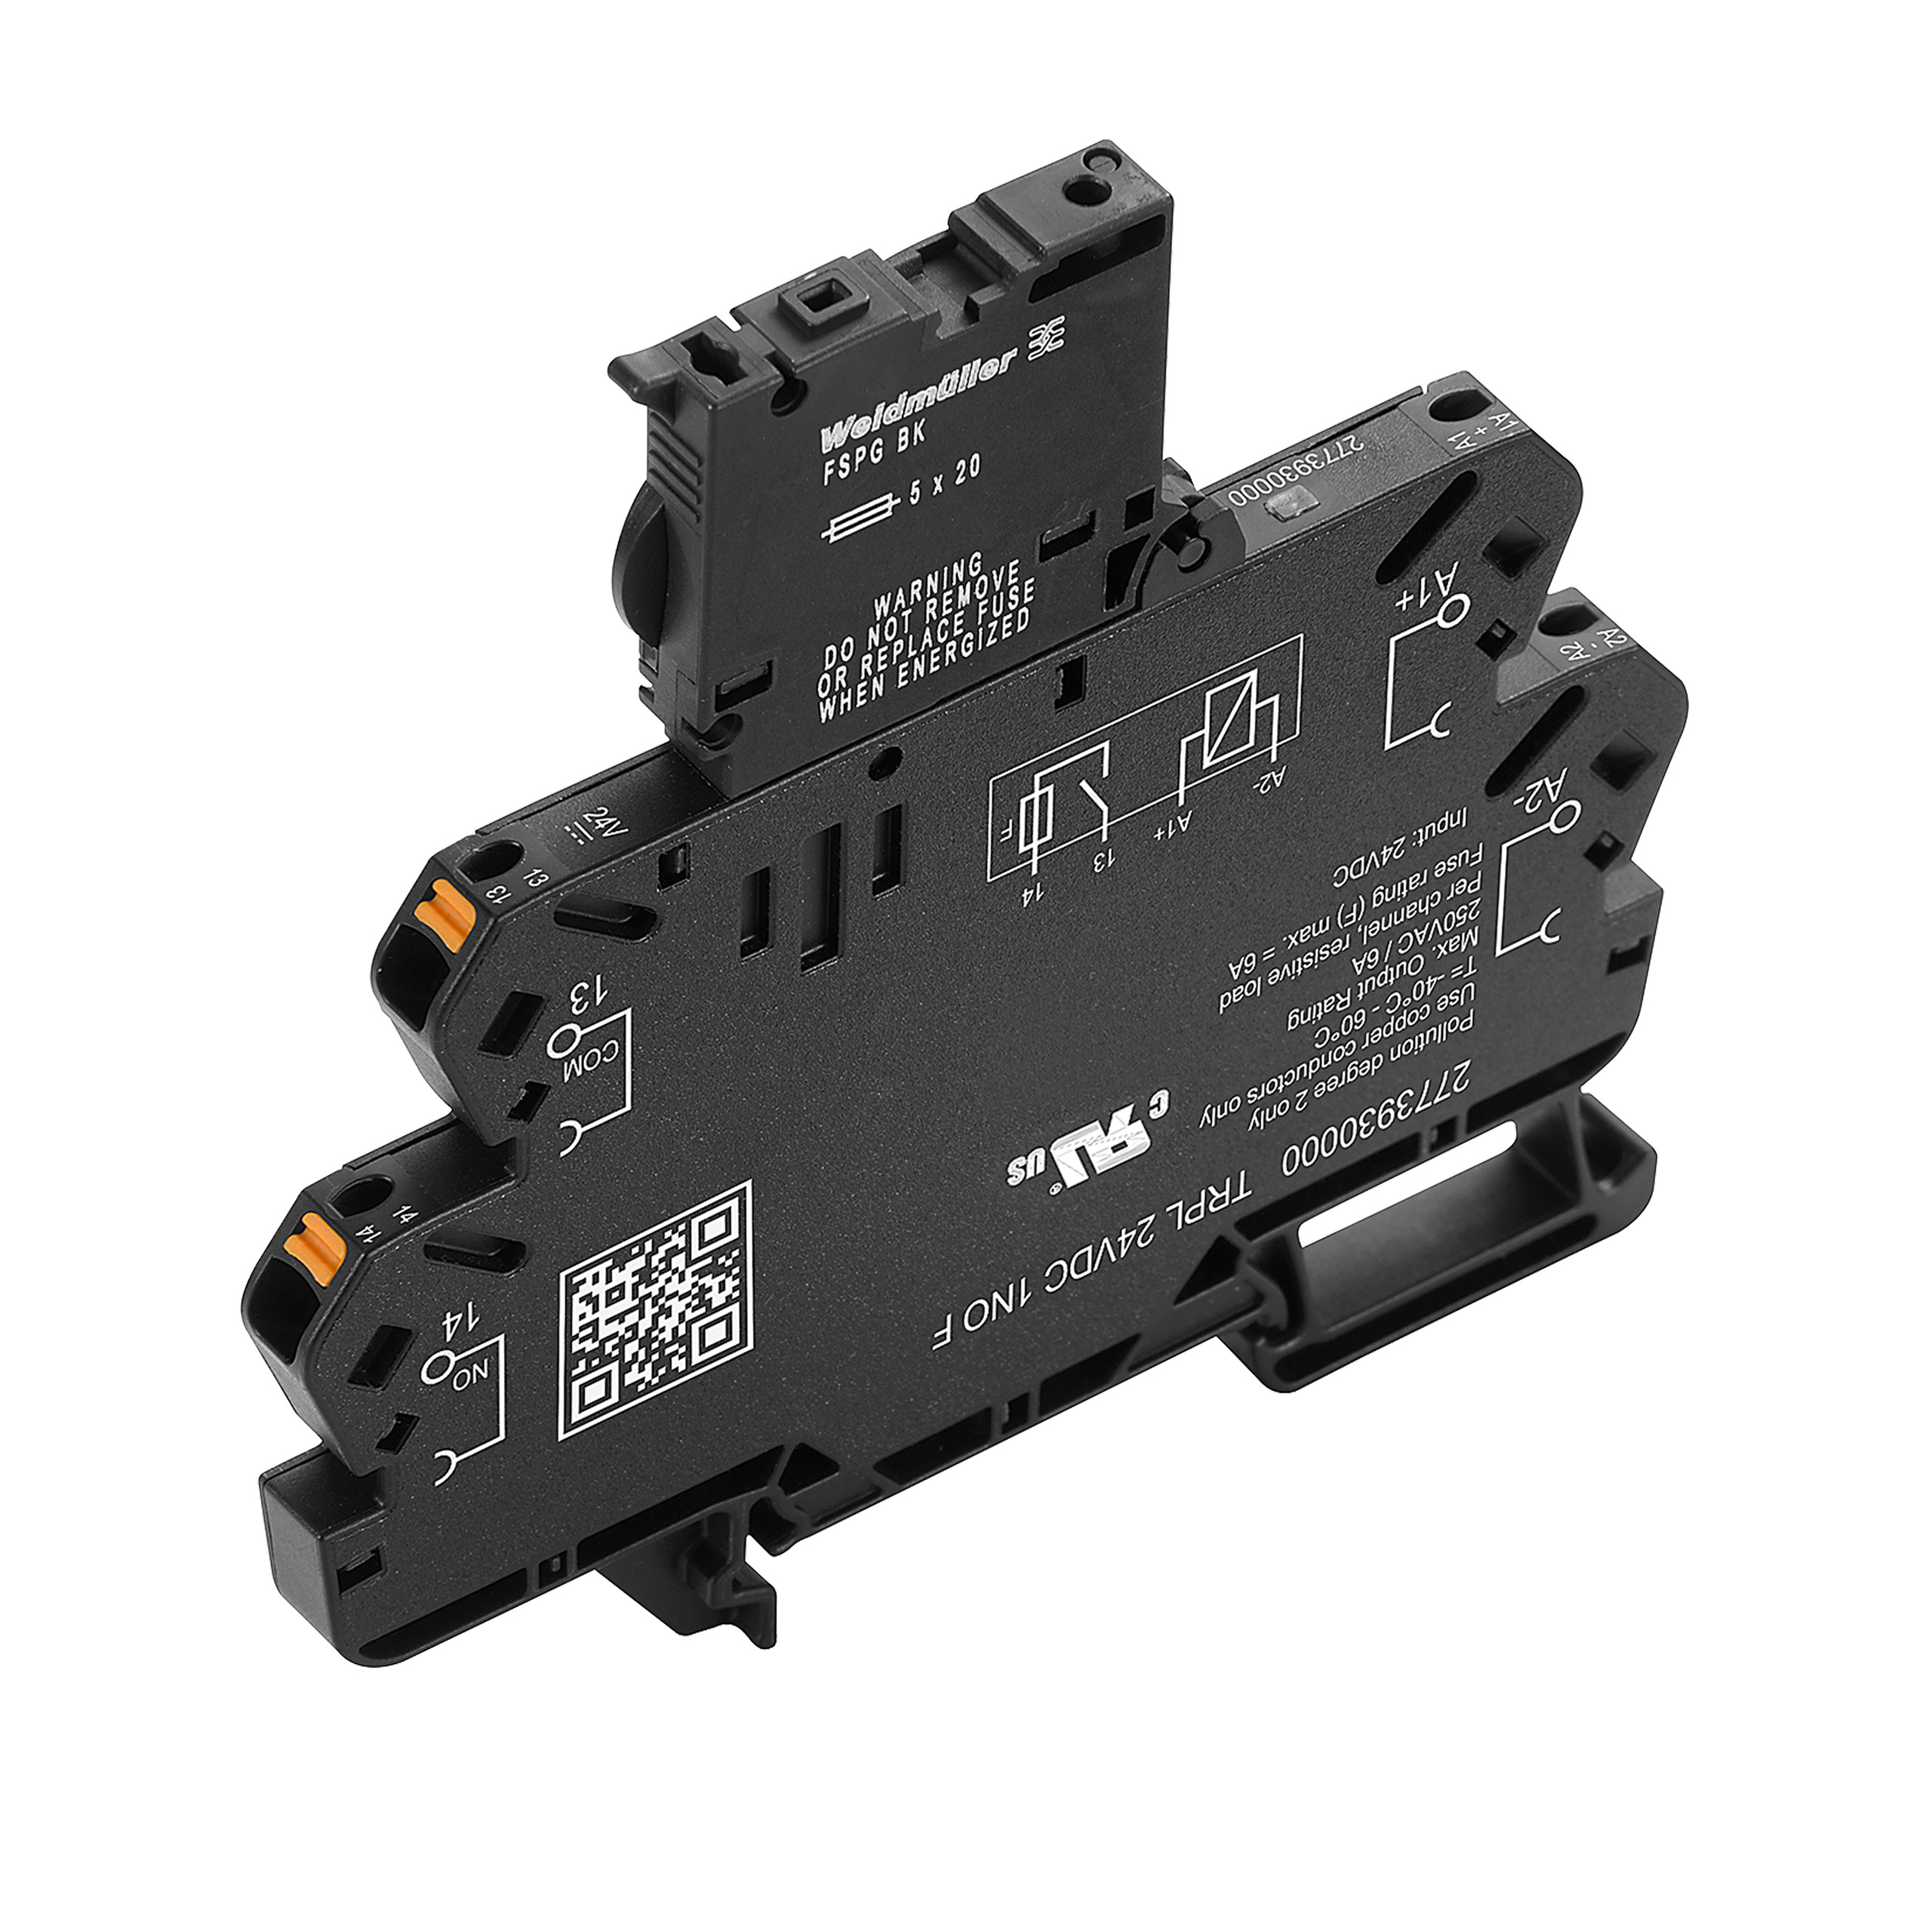 【2773930000】TERMSERIES-COMPACT, RELAY MODULE